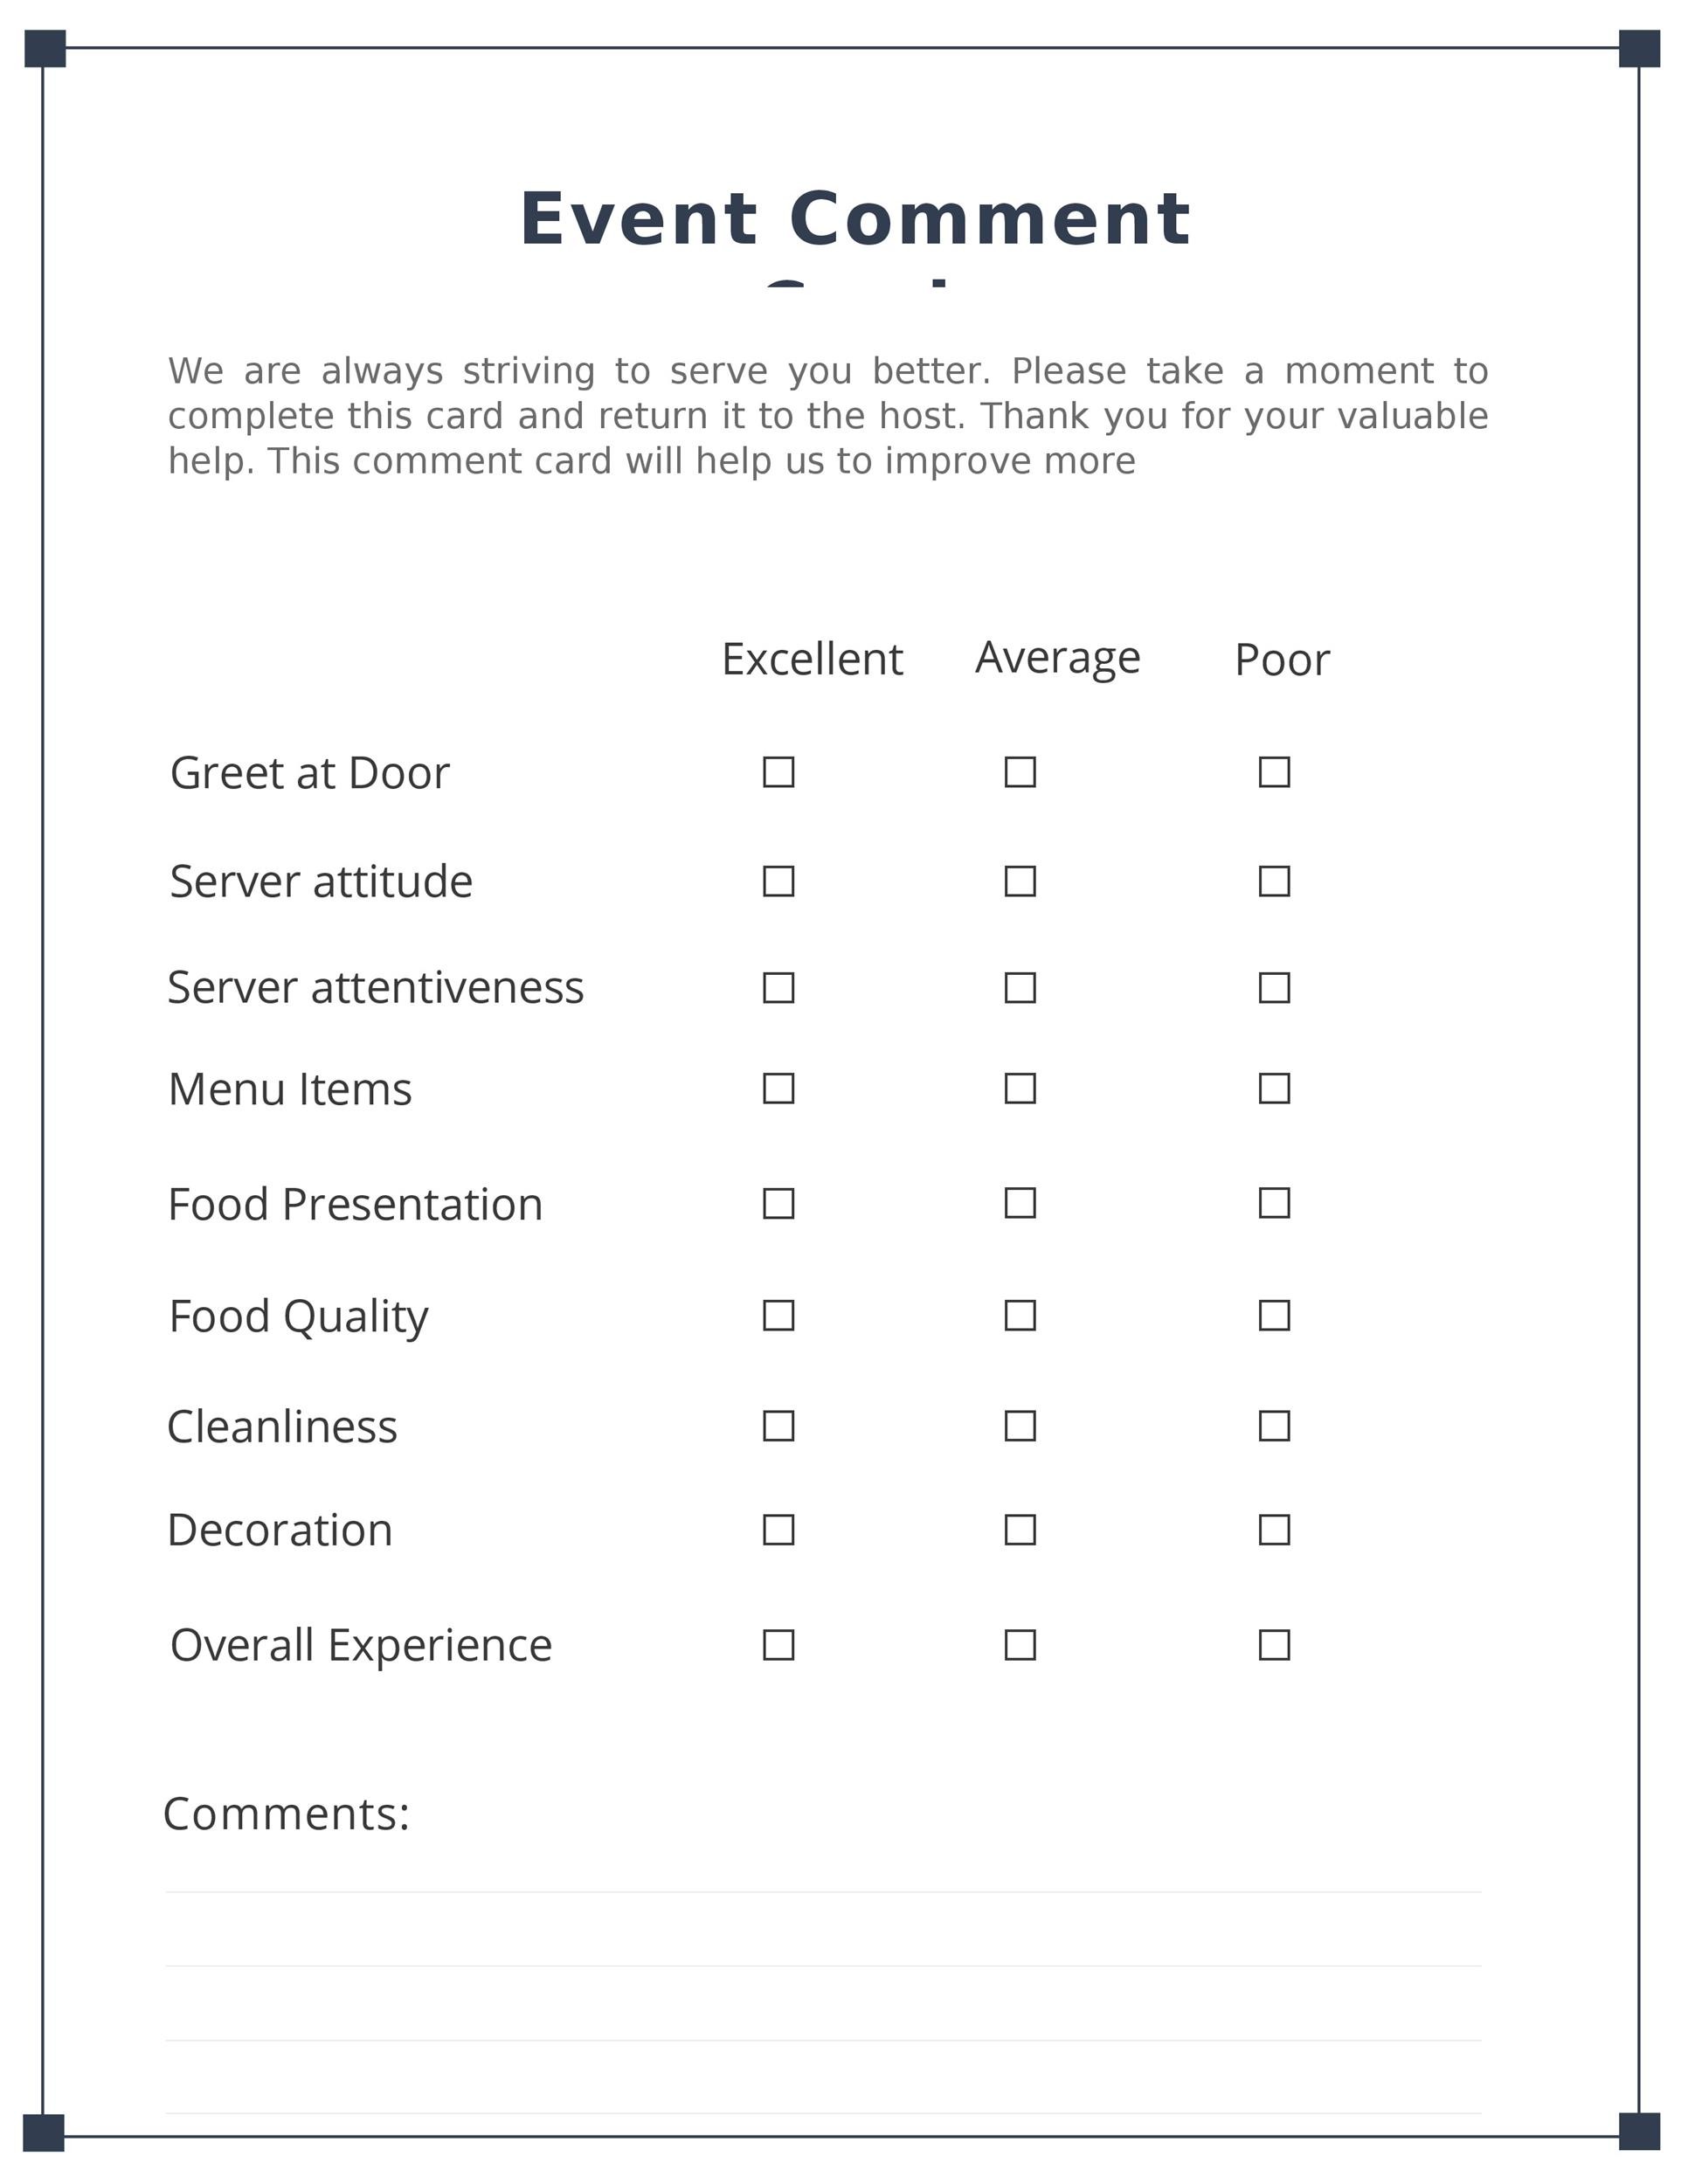 50 Printable Comment Card Feedback Form Templates ᐅ TemplateLab